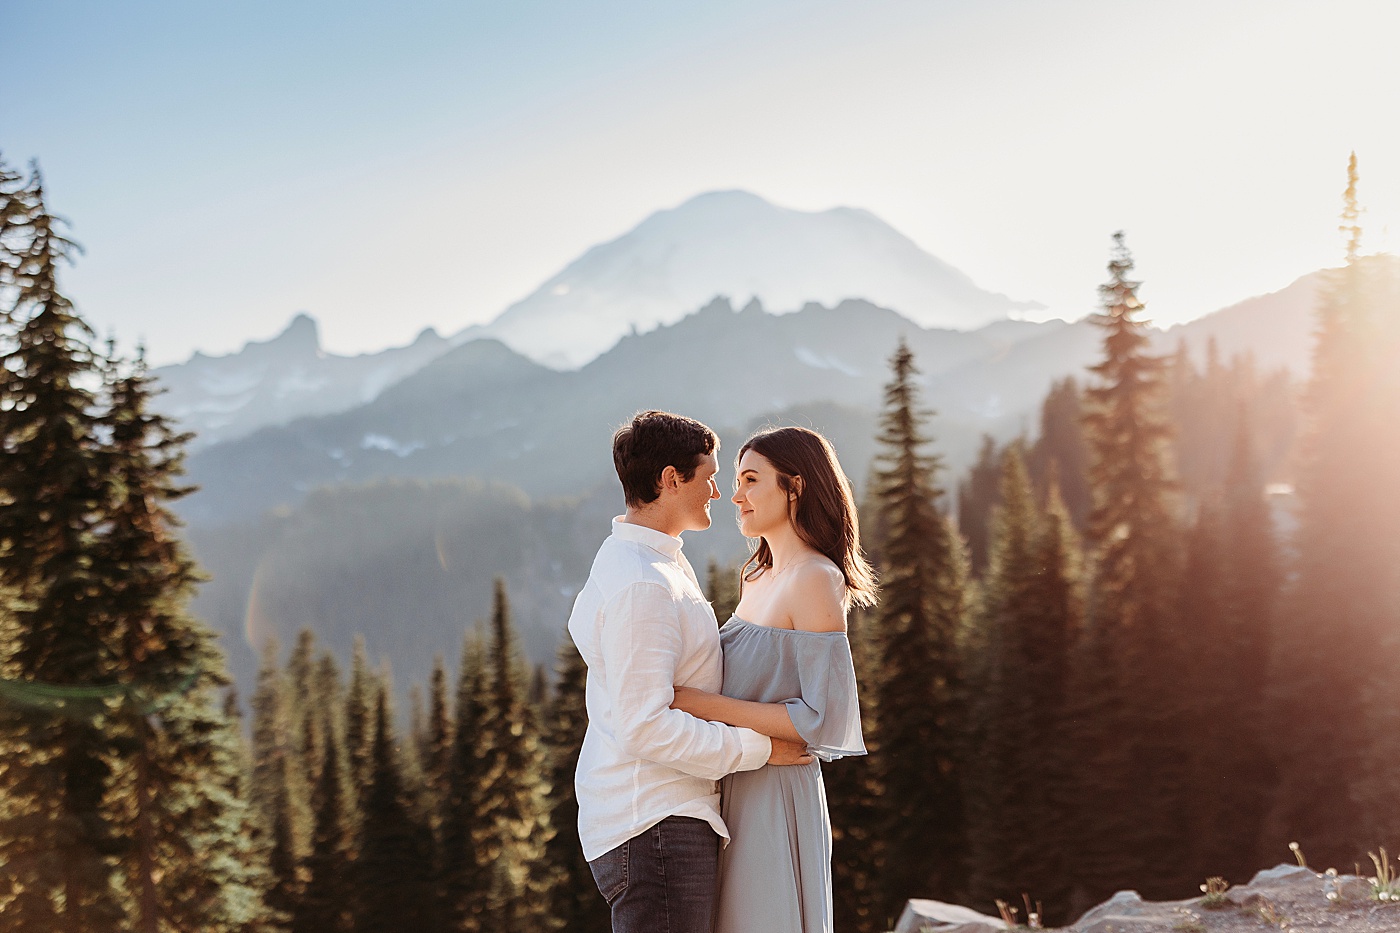 Couple looking at each other with views of the mountains in the background at Mt. Rainier | Photo by Megan Montalvo Photography